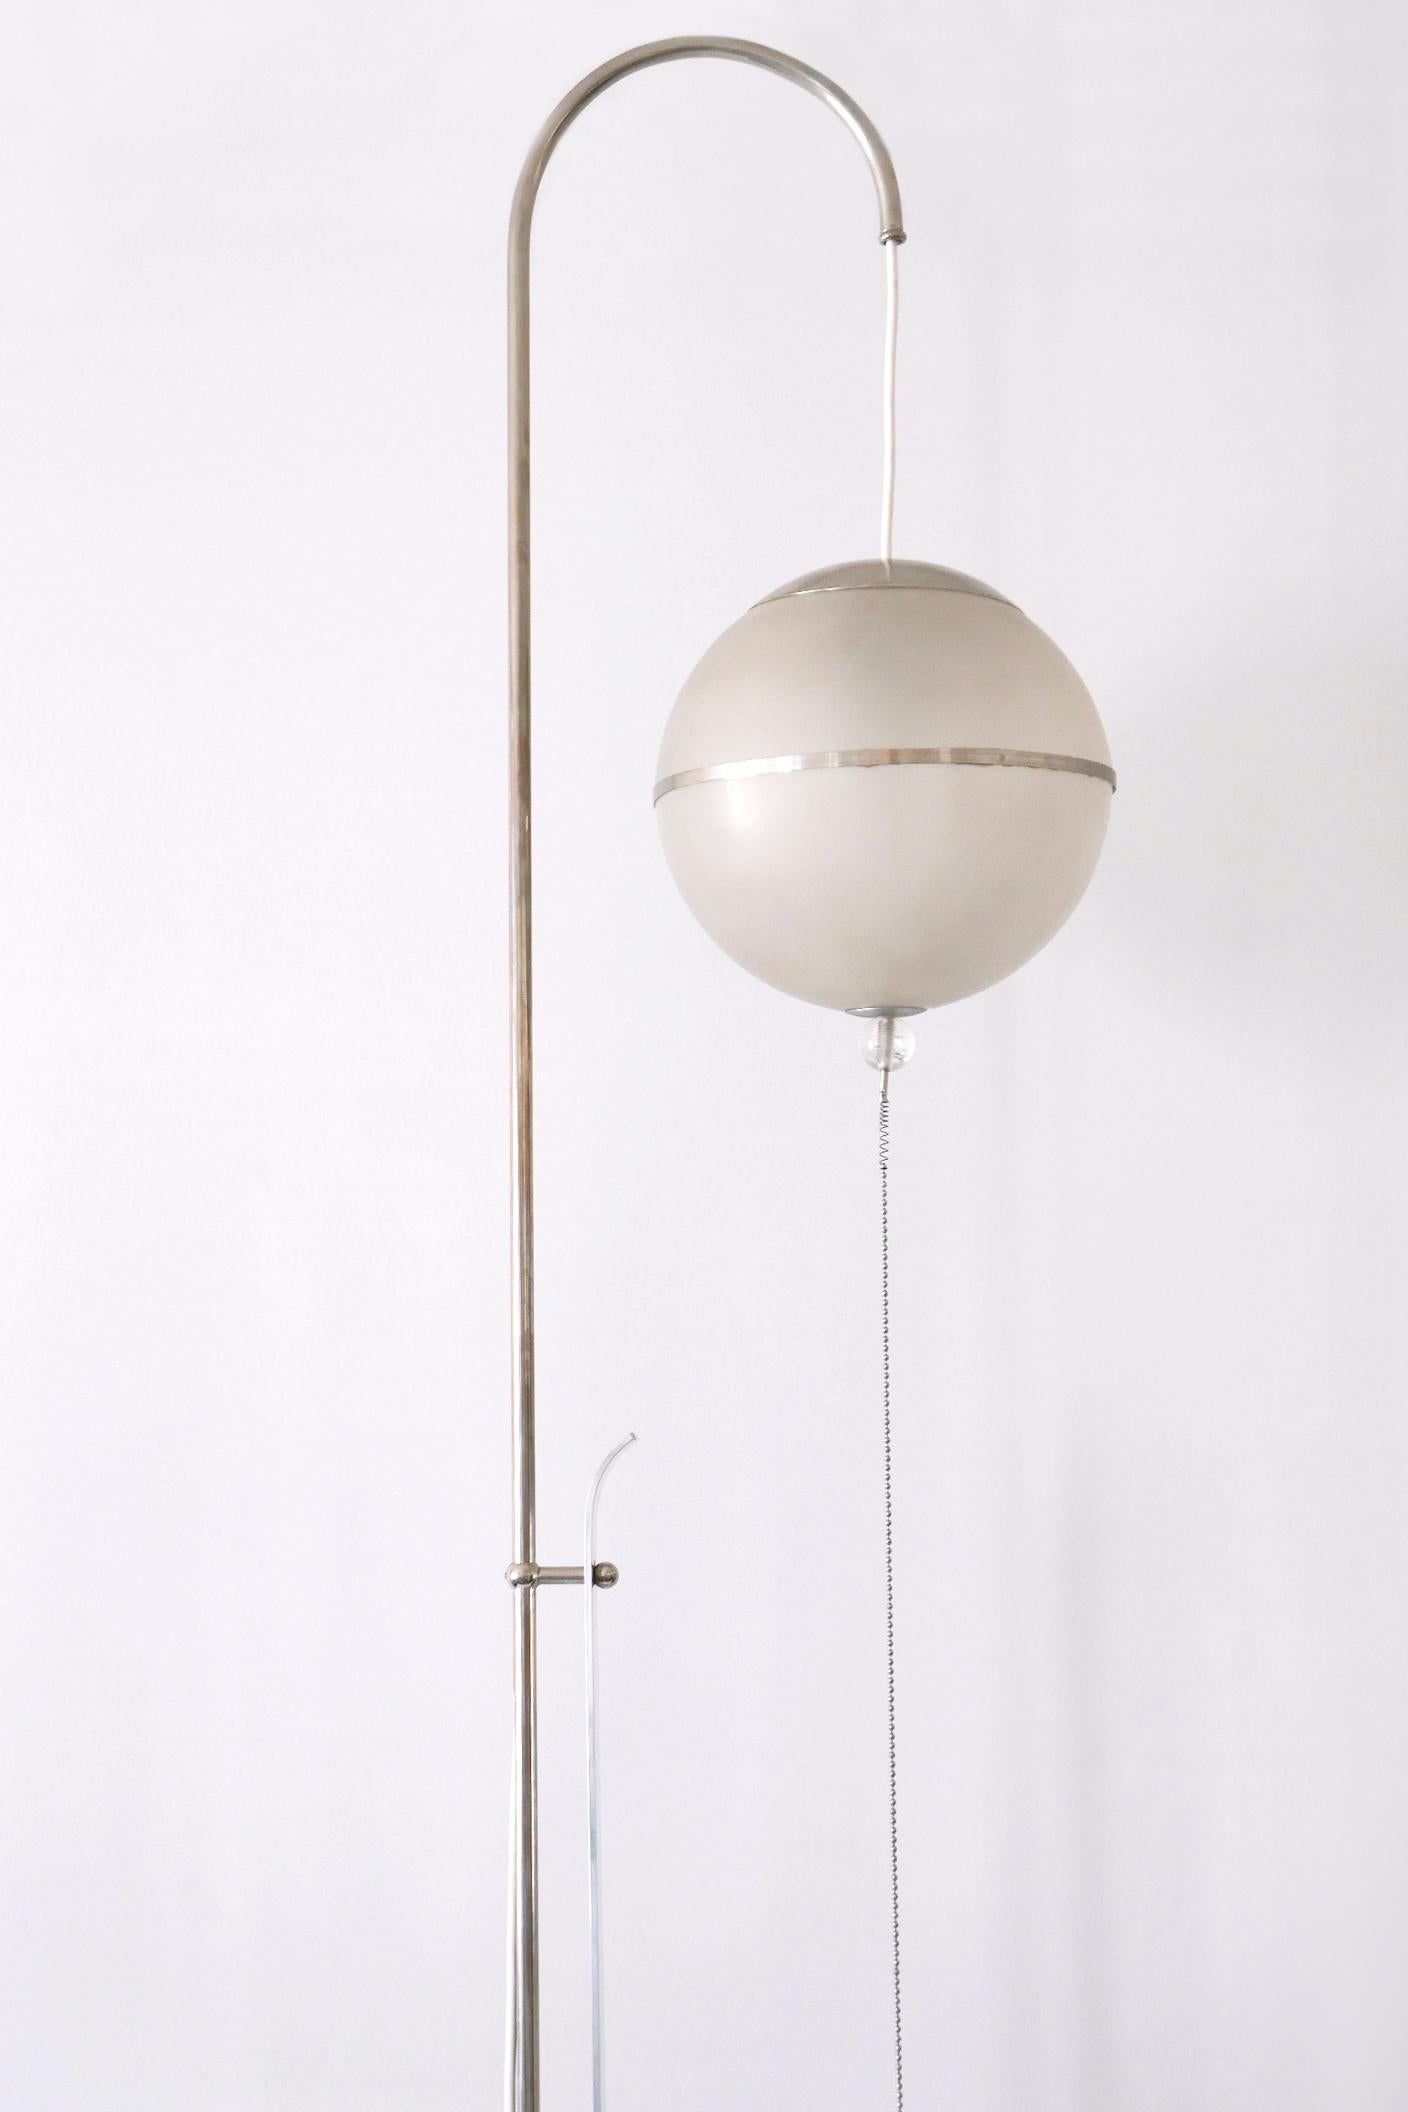 Bauhaus Floor Lamp by Karl Trabert for Schanzenbach & Co 1930s Germany For Sale 6